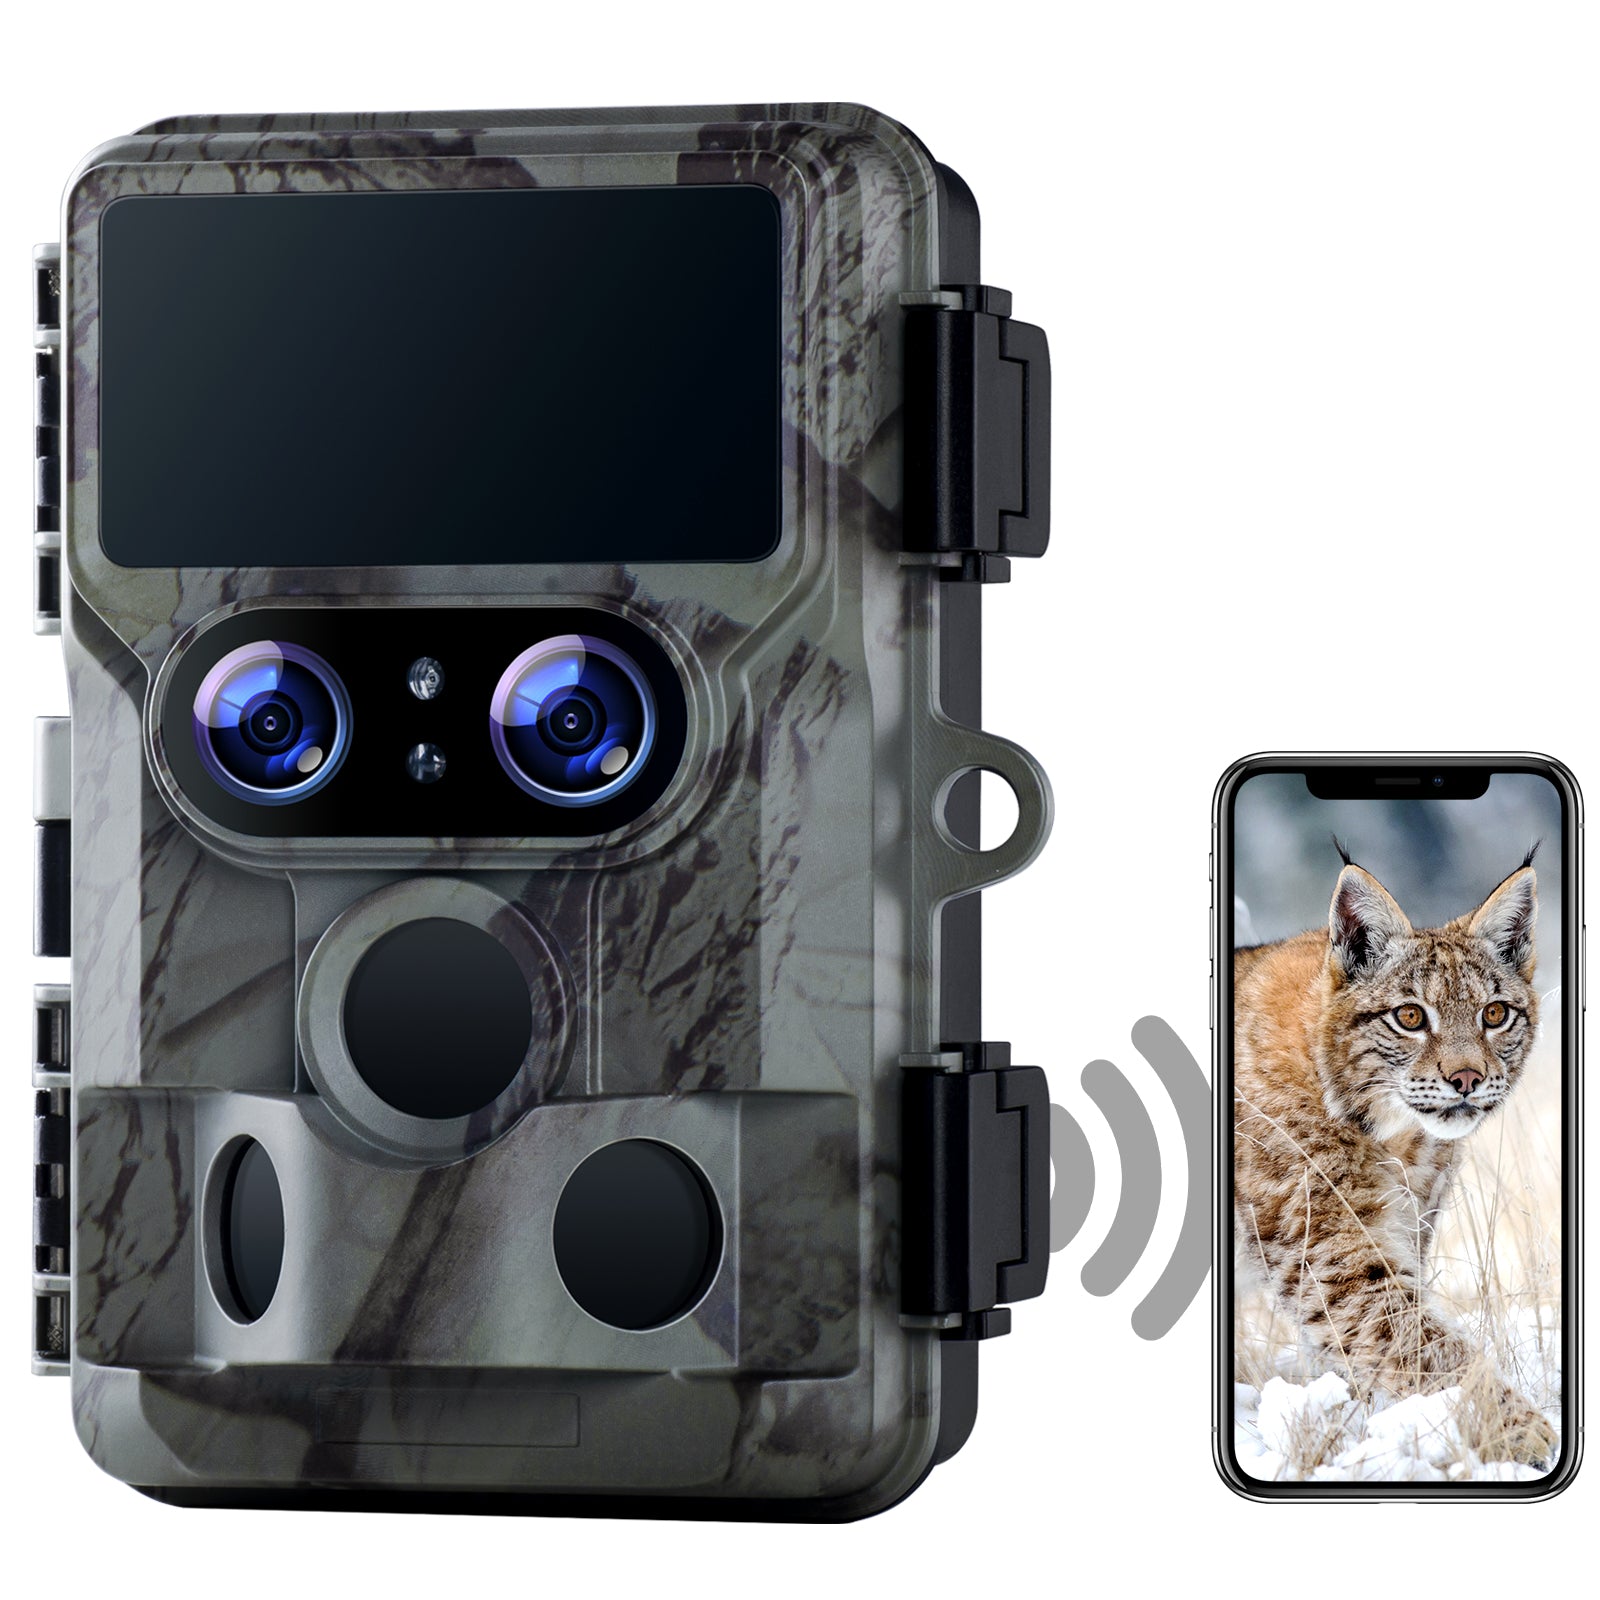 Campark TC06 4K 60MP WiFi Dual Lens Trail Camera with Color Night Vision